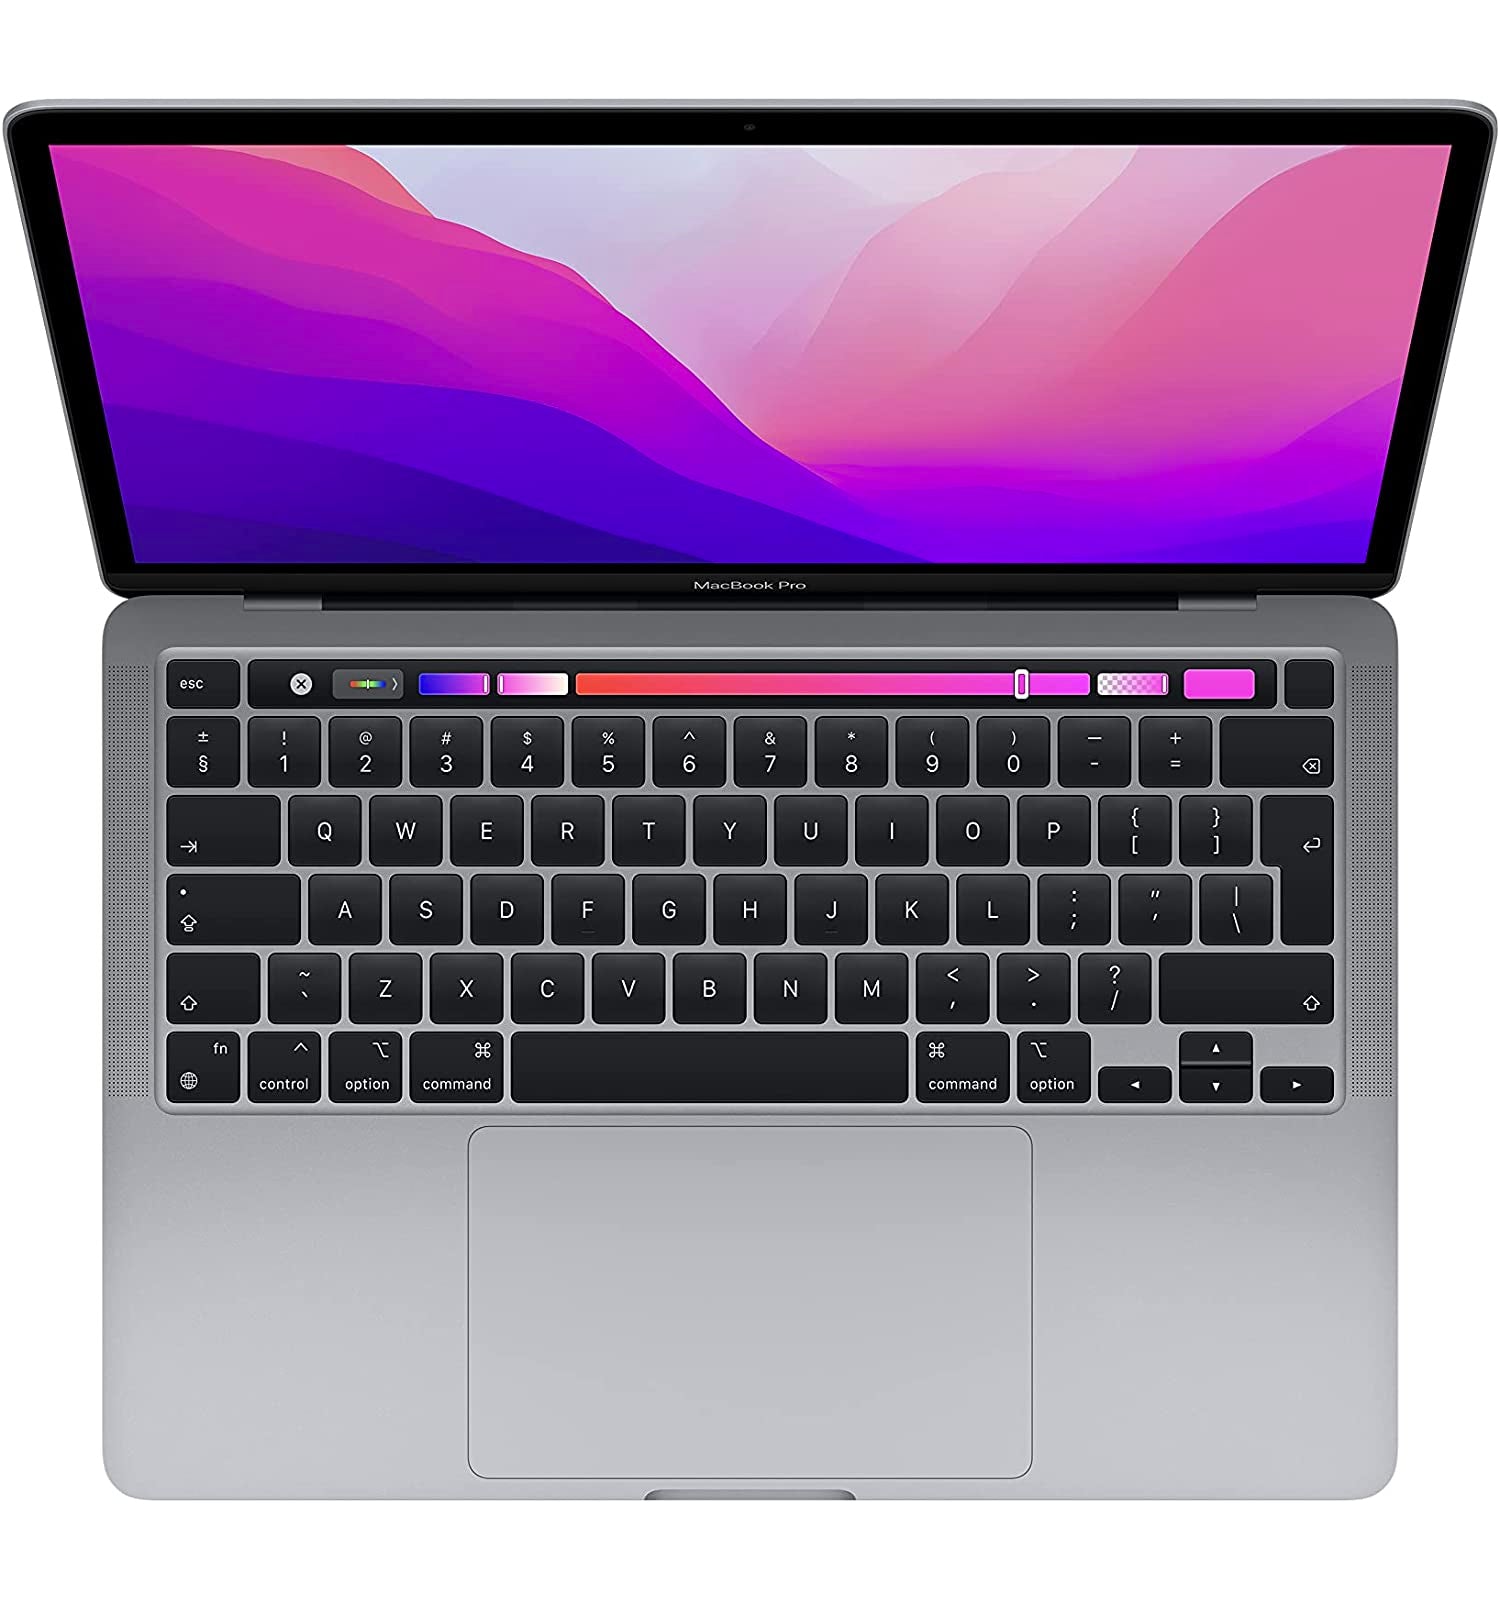 Apple MacBook Pro laptop with M2 chip: 13-inch Retina display, 8GB RAM, 256GB SSD storage, FaceTime HD camera. Works with iPhone and iPad; Space Grey ; Arabic/English